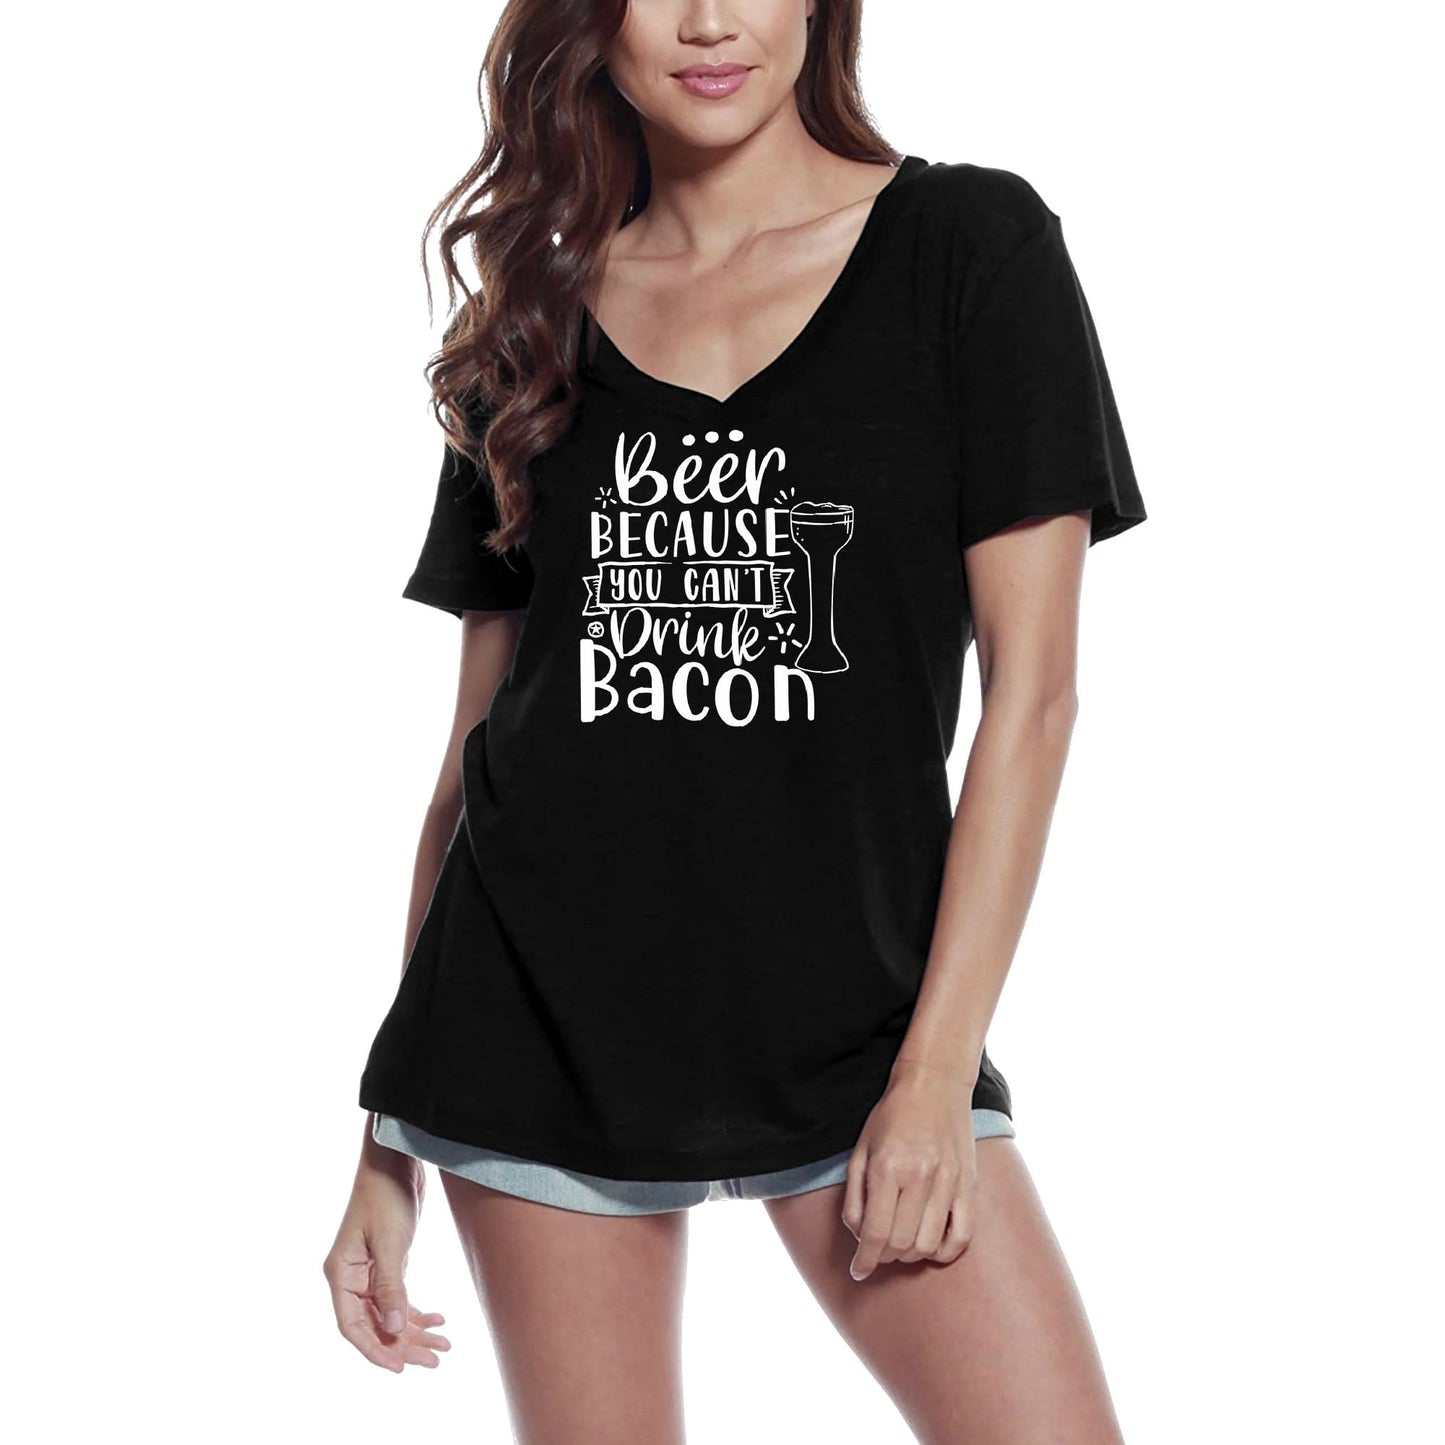 ULTRABASIC Women's T-Shirt Beer Because You Can't Drink Bacon - Funny Short Sleeve Tee Shirt